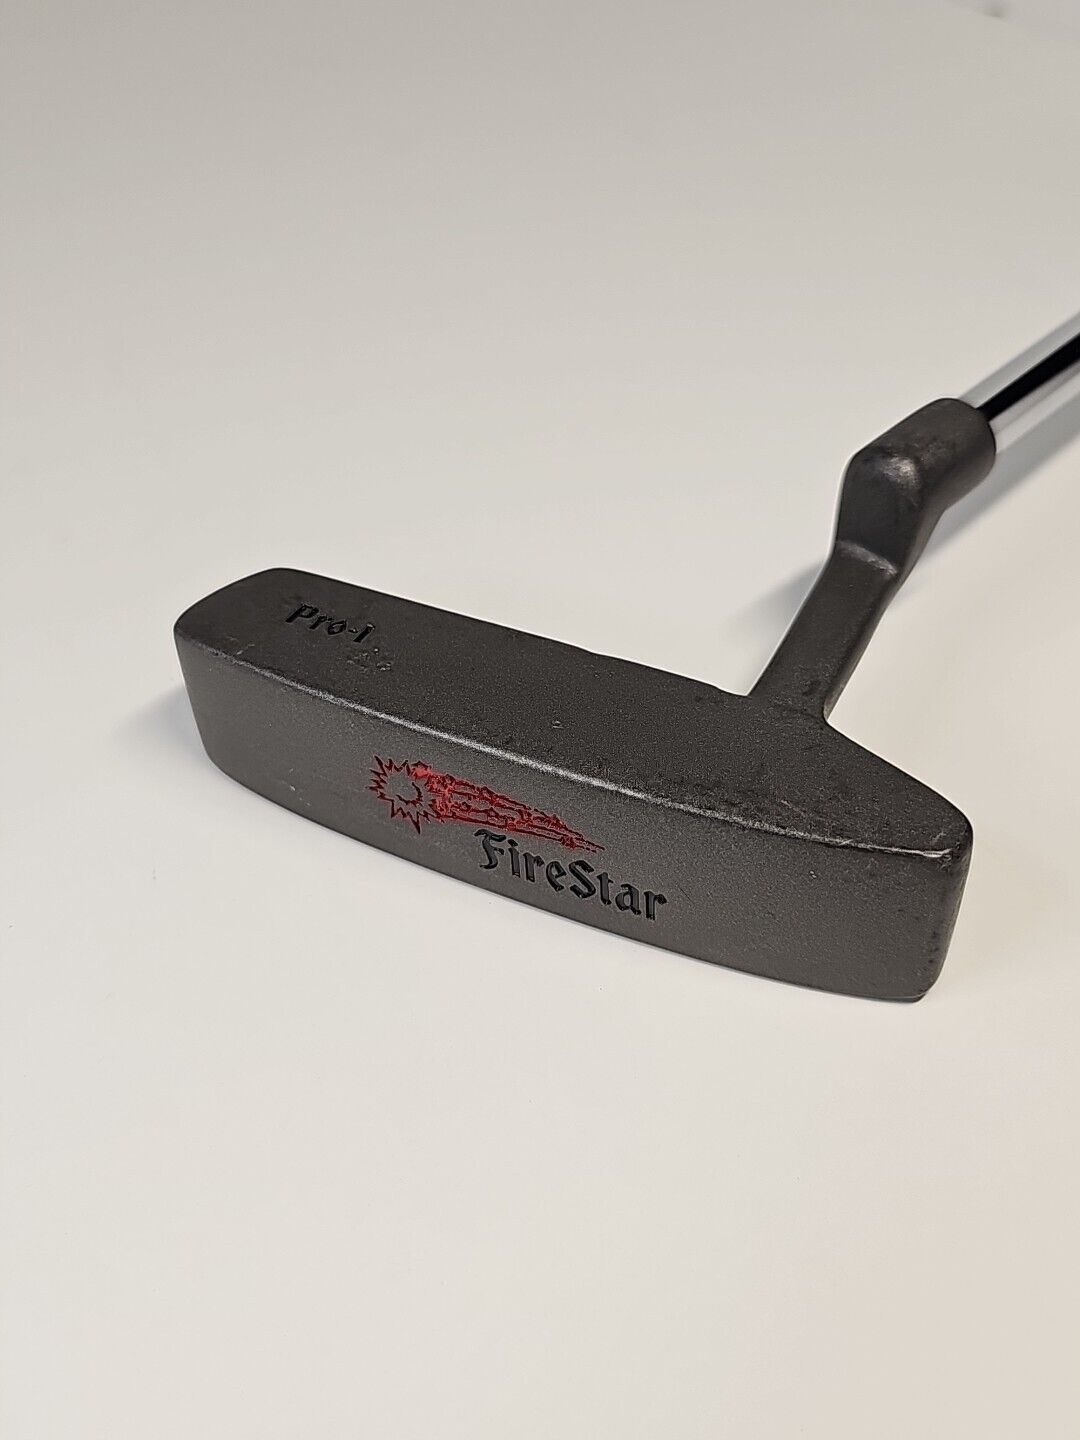 Firestar Golfsmith Putter Pro-1 Junior Right Handed Approx 33 Inches